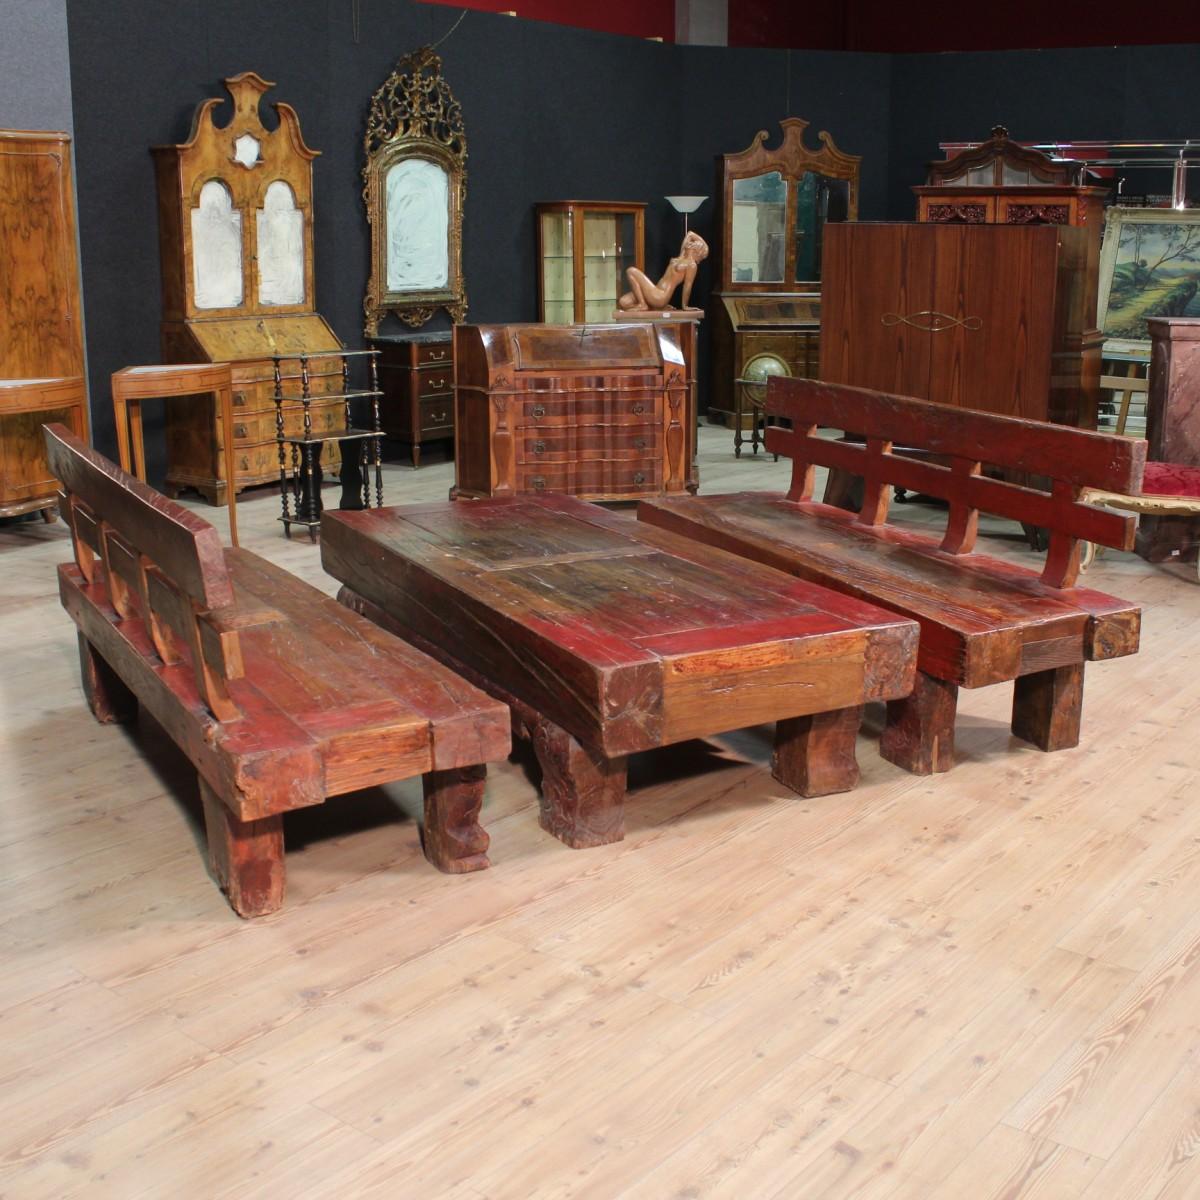 Oriental set of the 20th century consisting of two large benches and a carved and painted wooden table. Furniture built in a single block, not removable, ideal to be placed under a porch or in a large living room. Bench measurements: H 95 x W 210 x